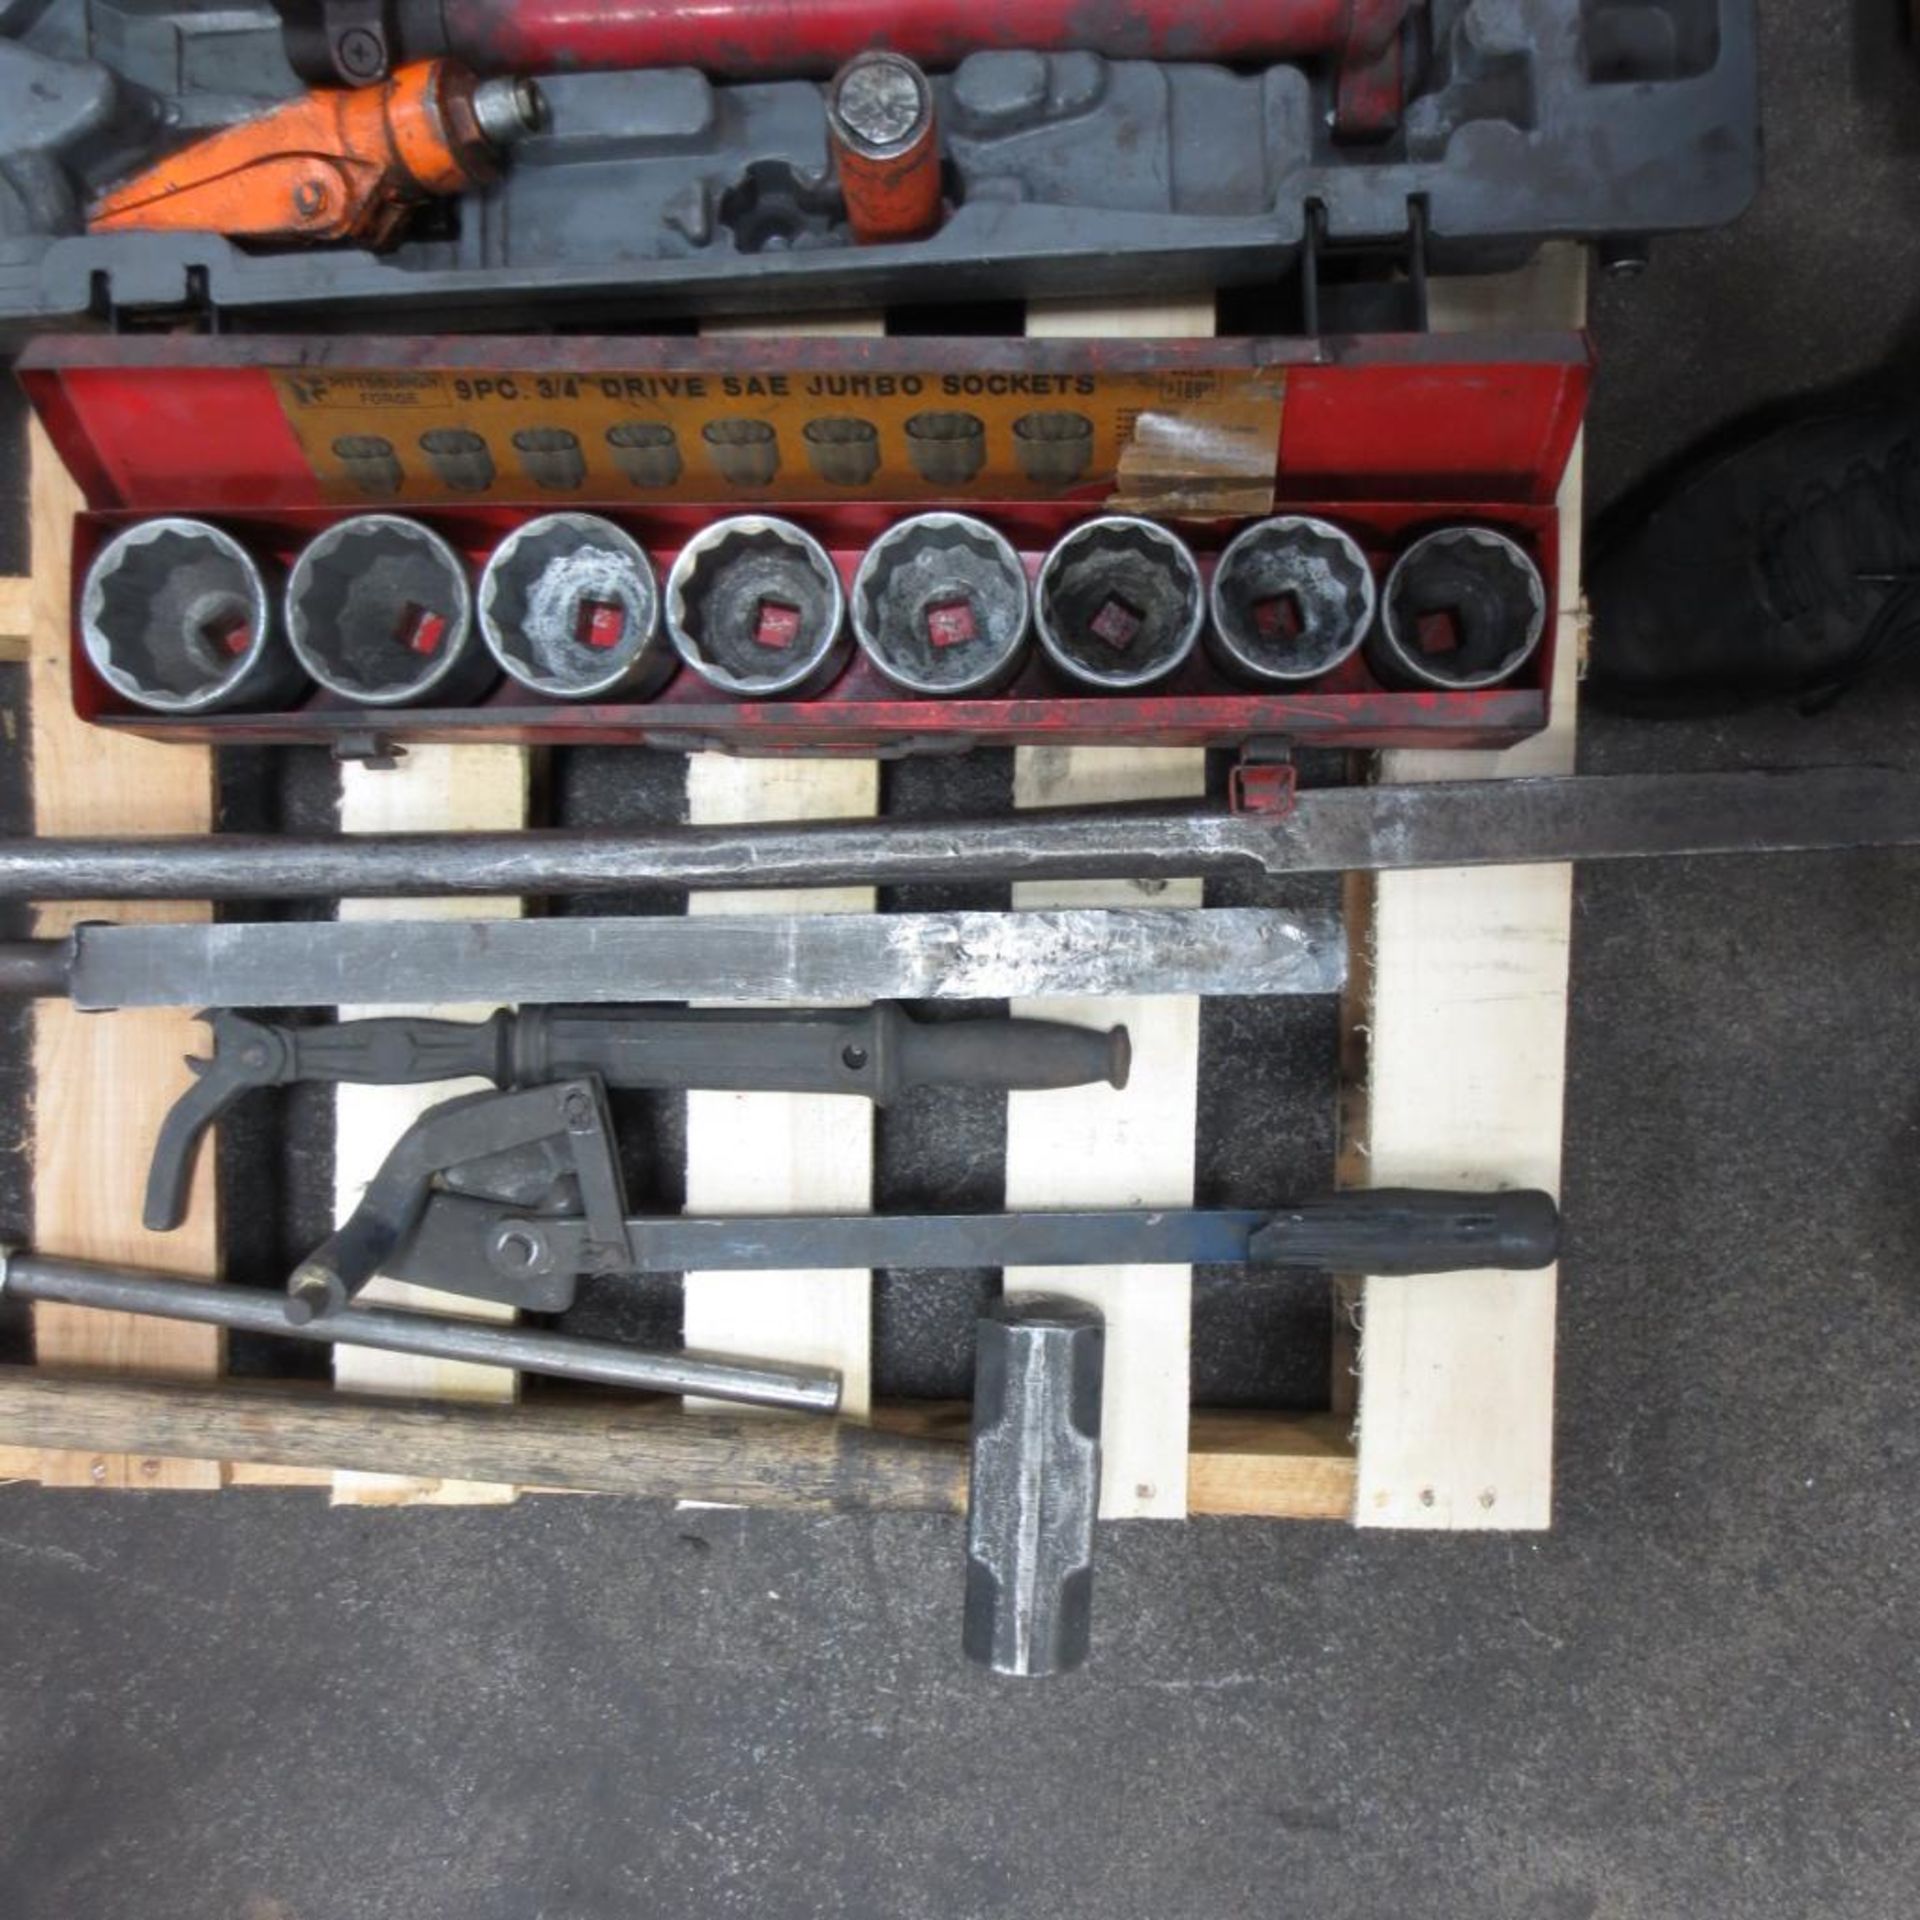 Skid with 10 Ton Portable Puller Kit, Tube Cutter, Socket and Socket Set ( Loc. Greenville, IL ) - Image 3 of 4